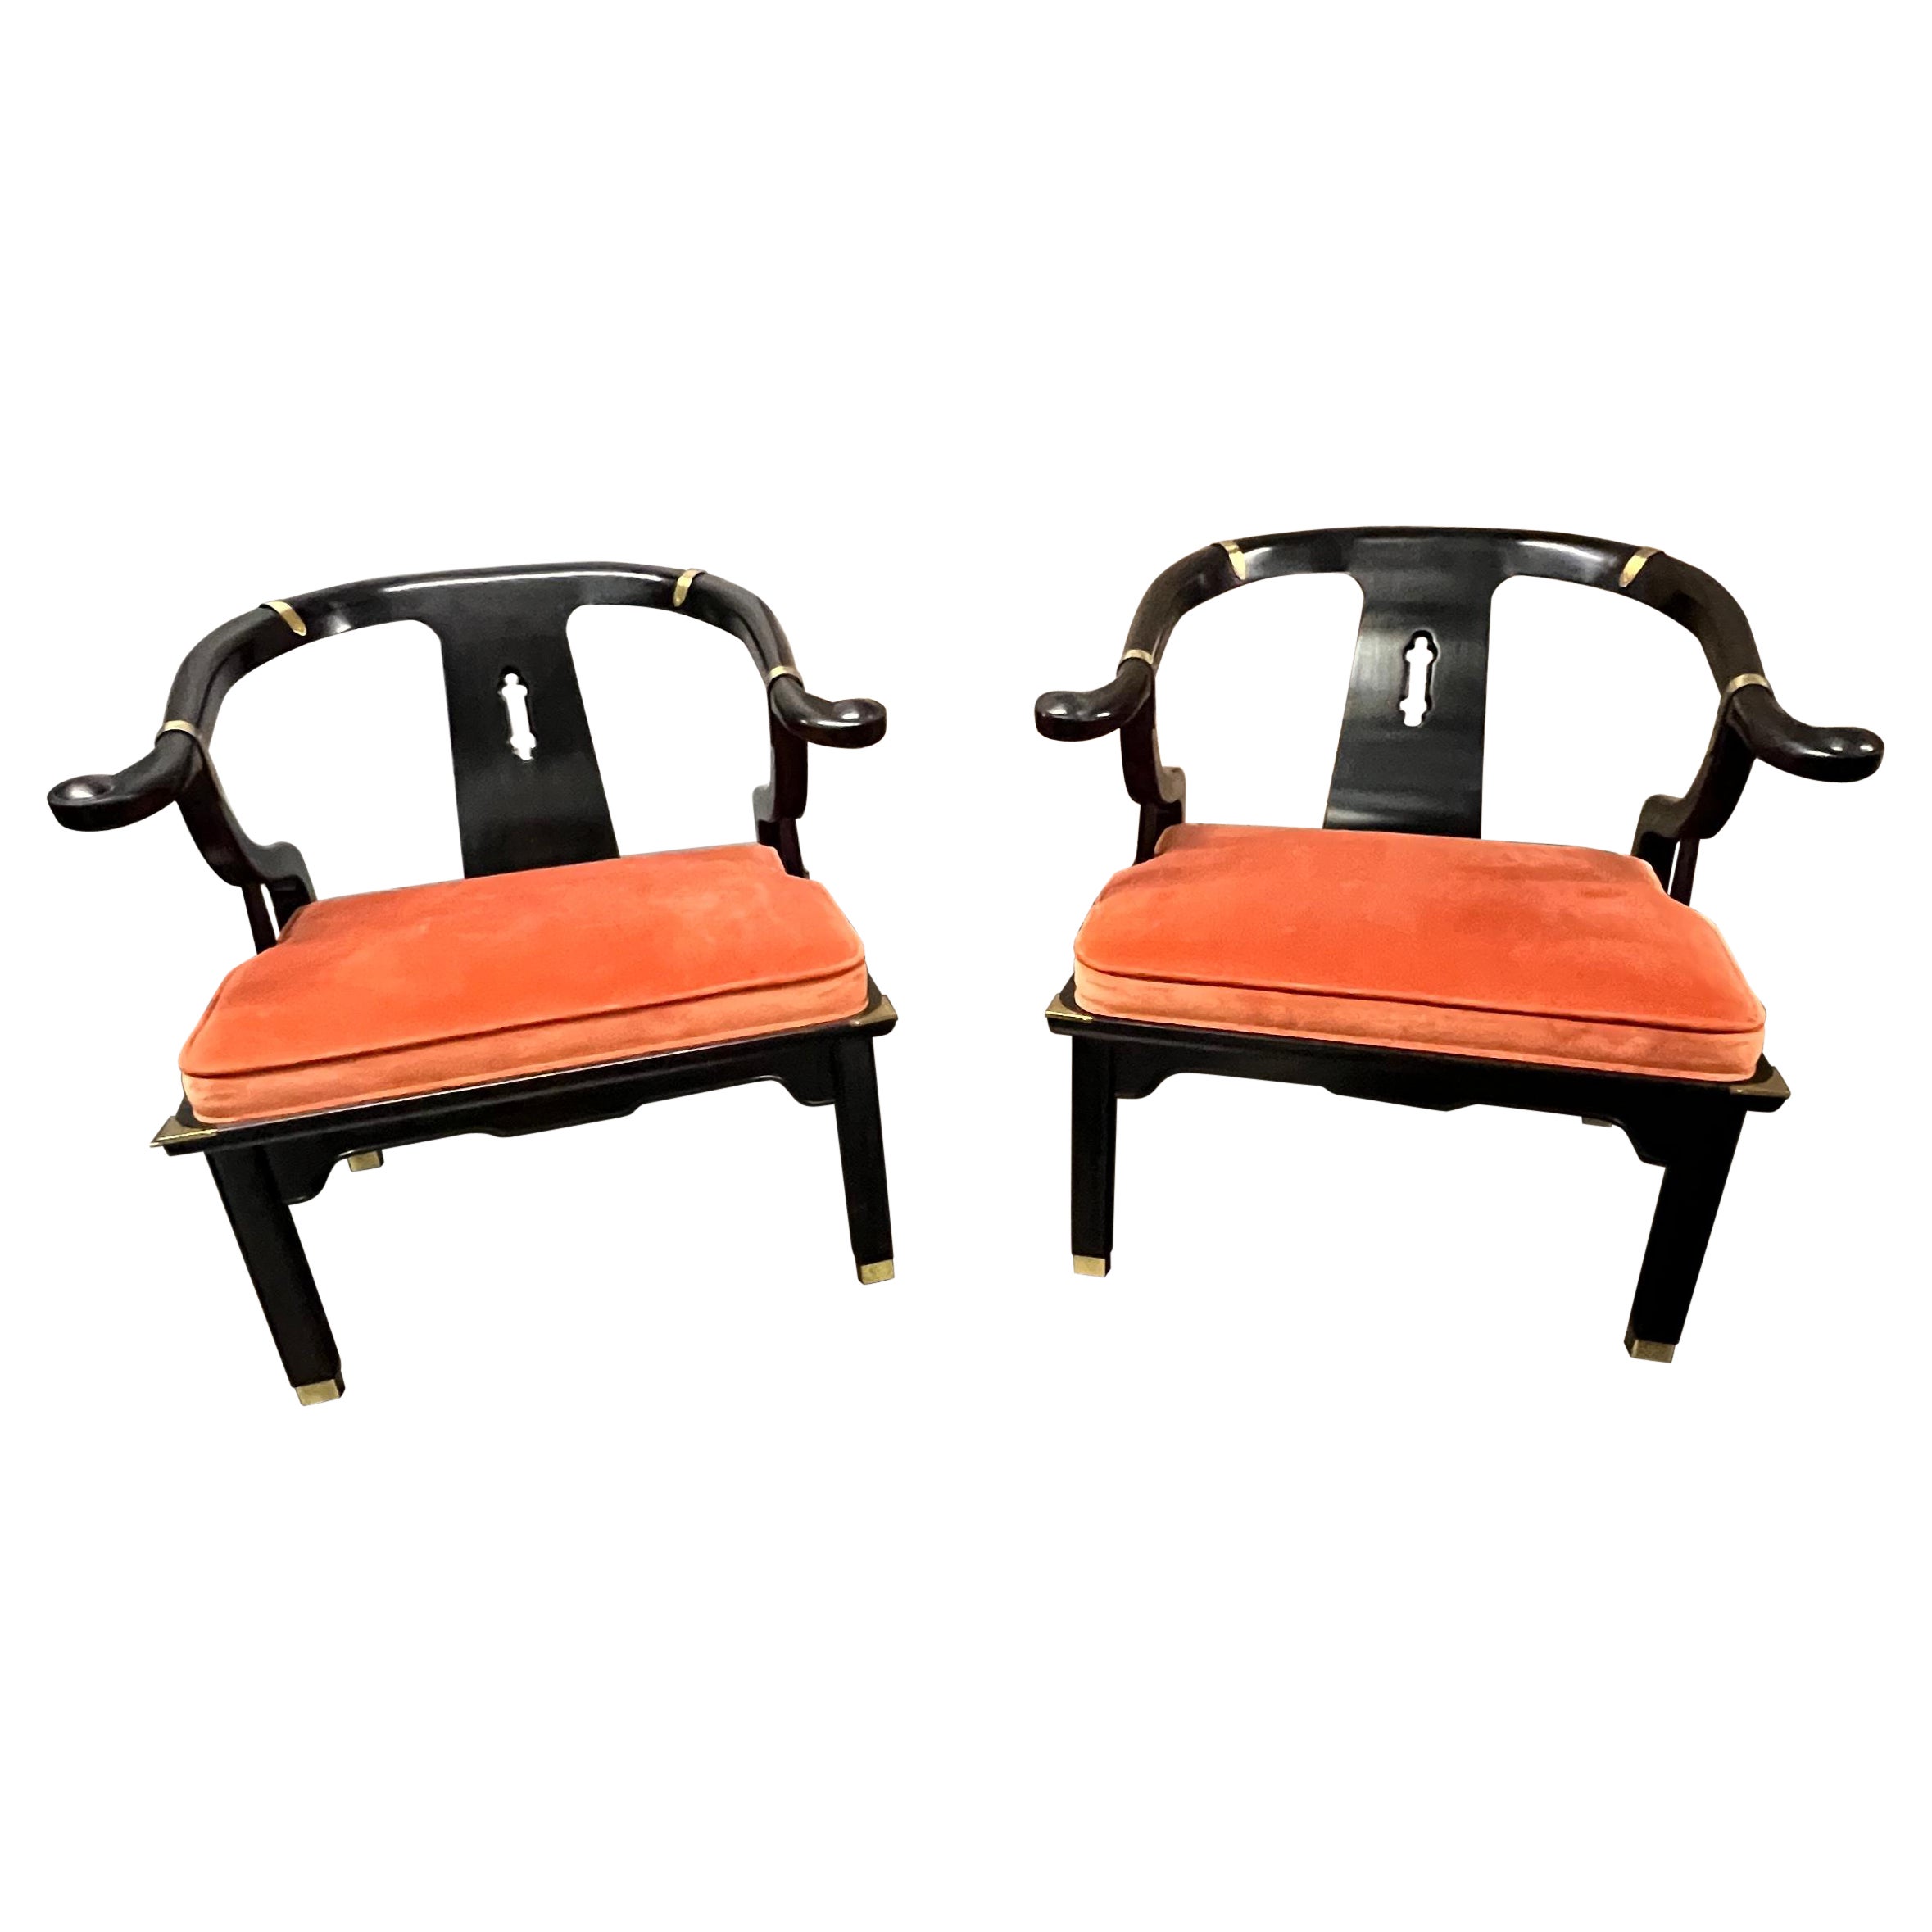 Pair of James Mont Style Mid-Century Lacquered Horseshoe Chairs by Century